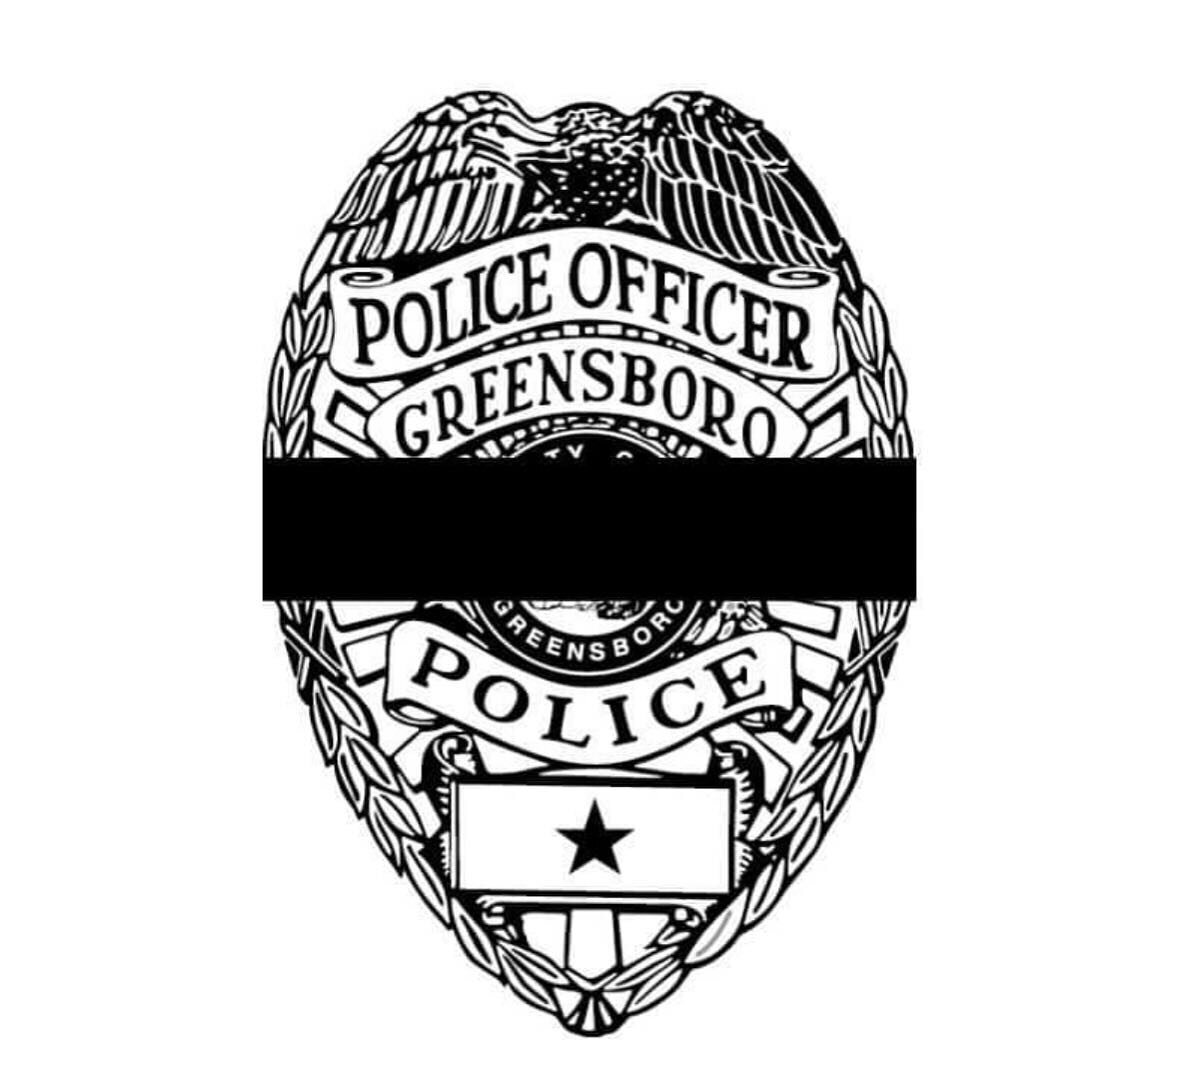 Prayers for @greensboropolicedepartment, those involved in this senseless act and all their officers and their families. From us here in Monroe, we stand with you. We are grateful for your sacrifice.